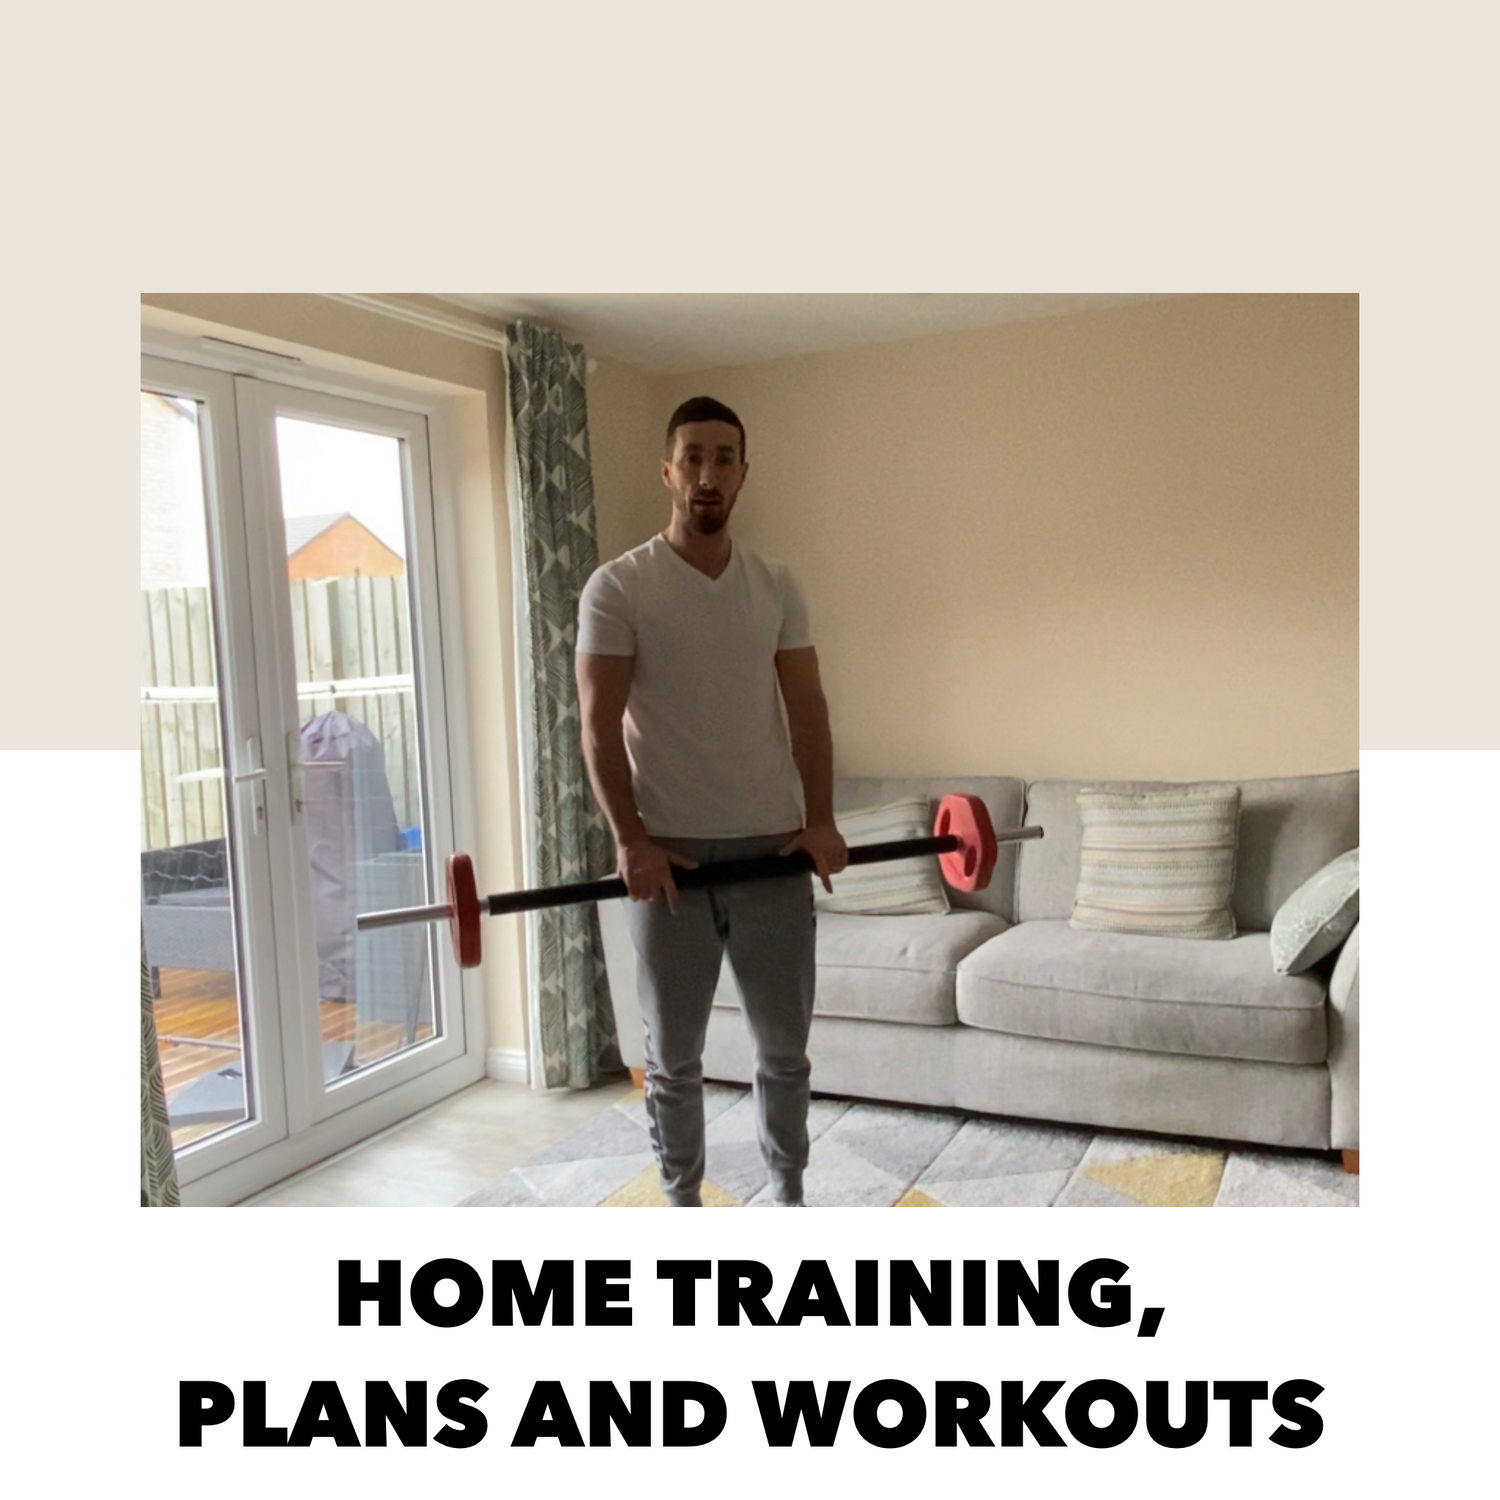 Home Training Plans And Workouts